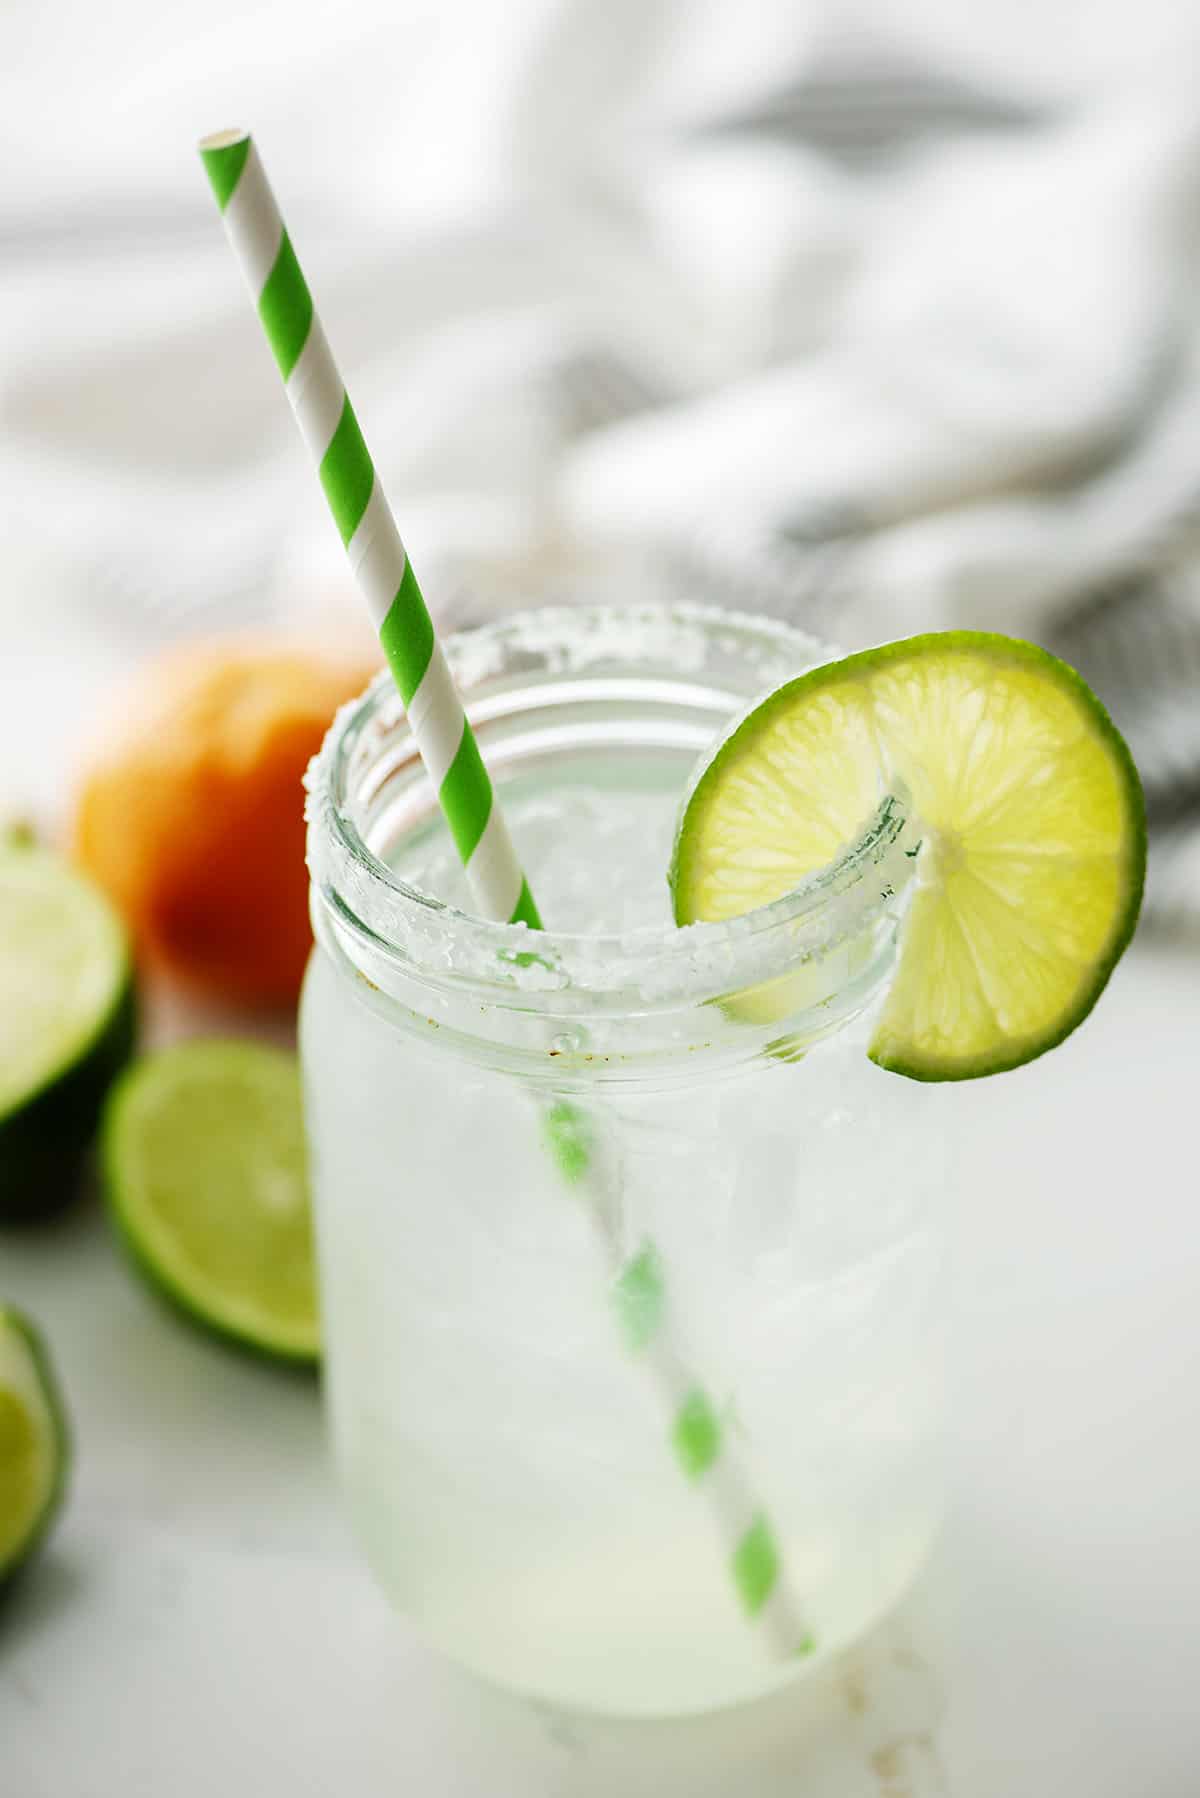 margarita in glass with green striped straw.